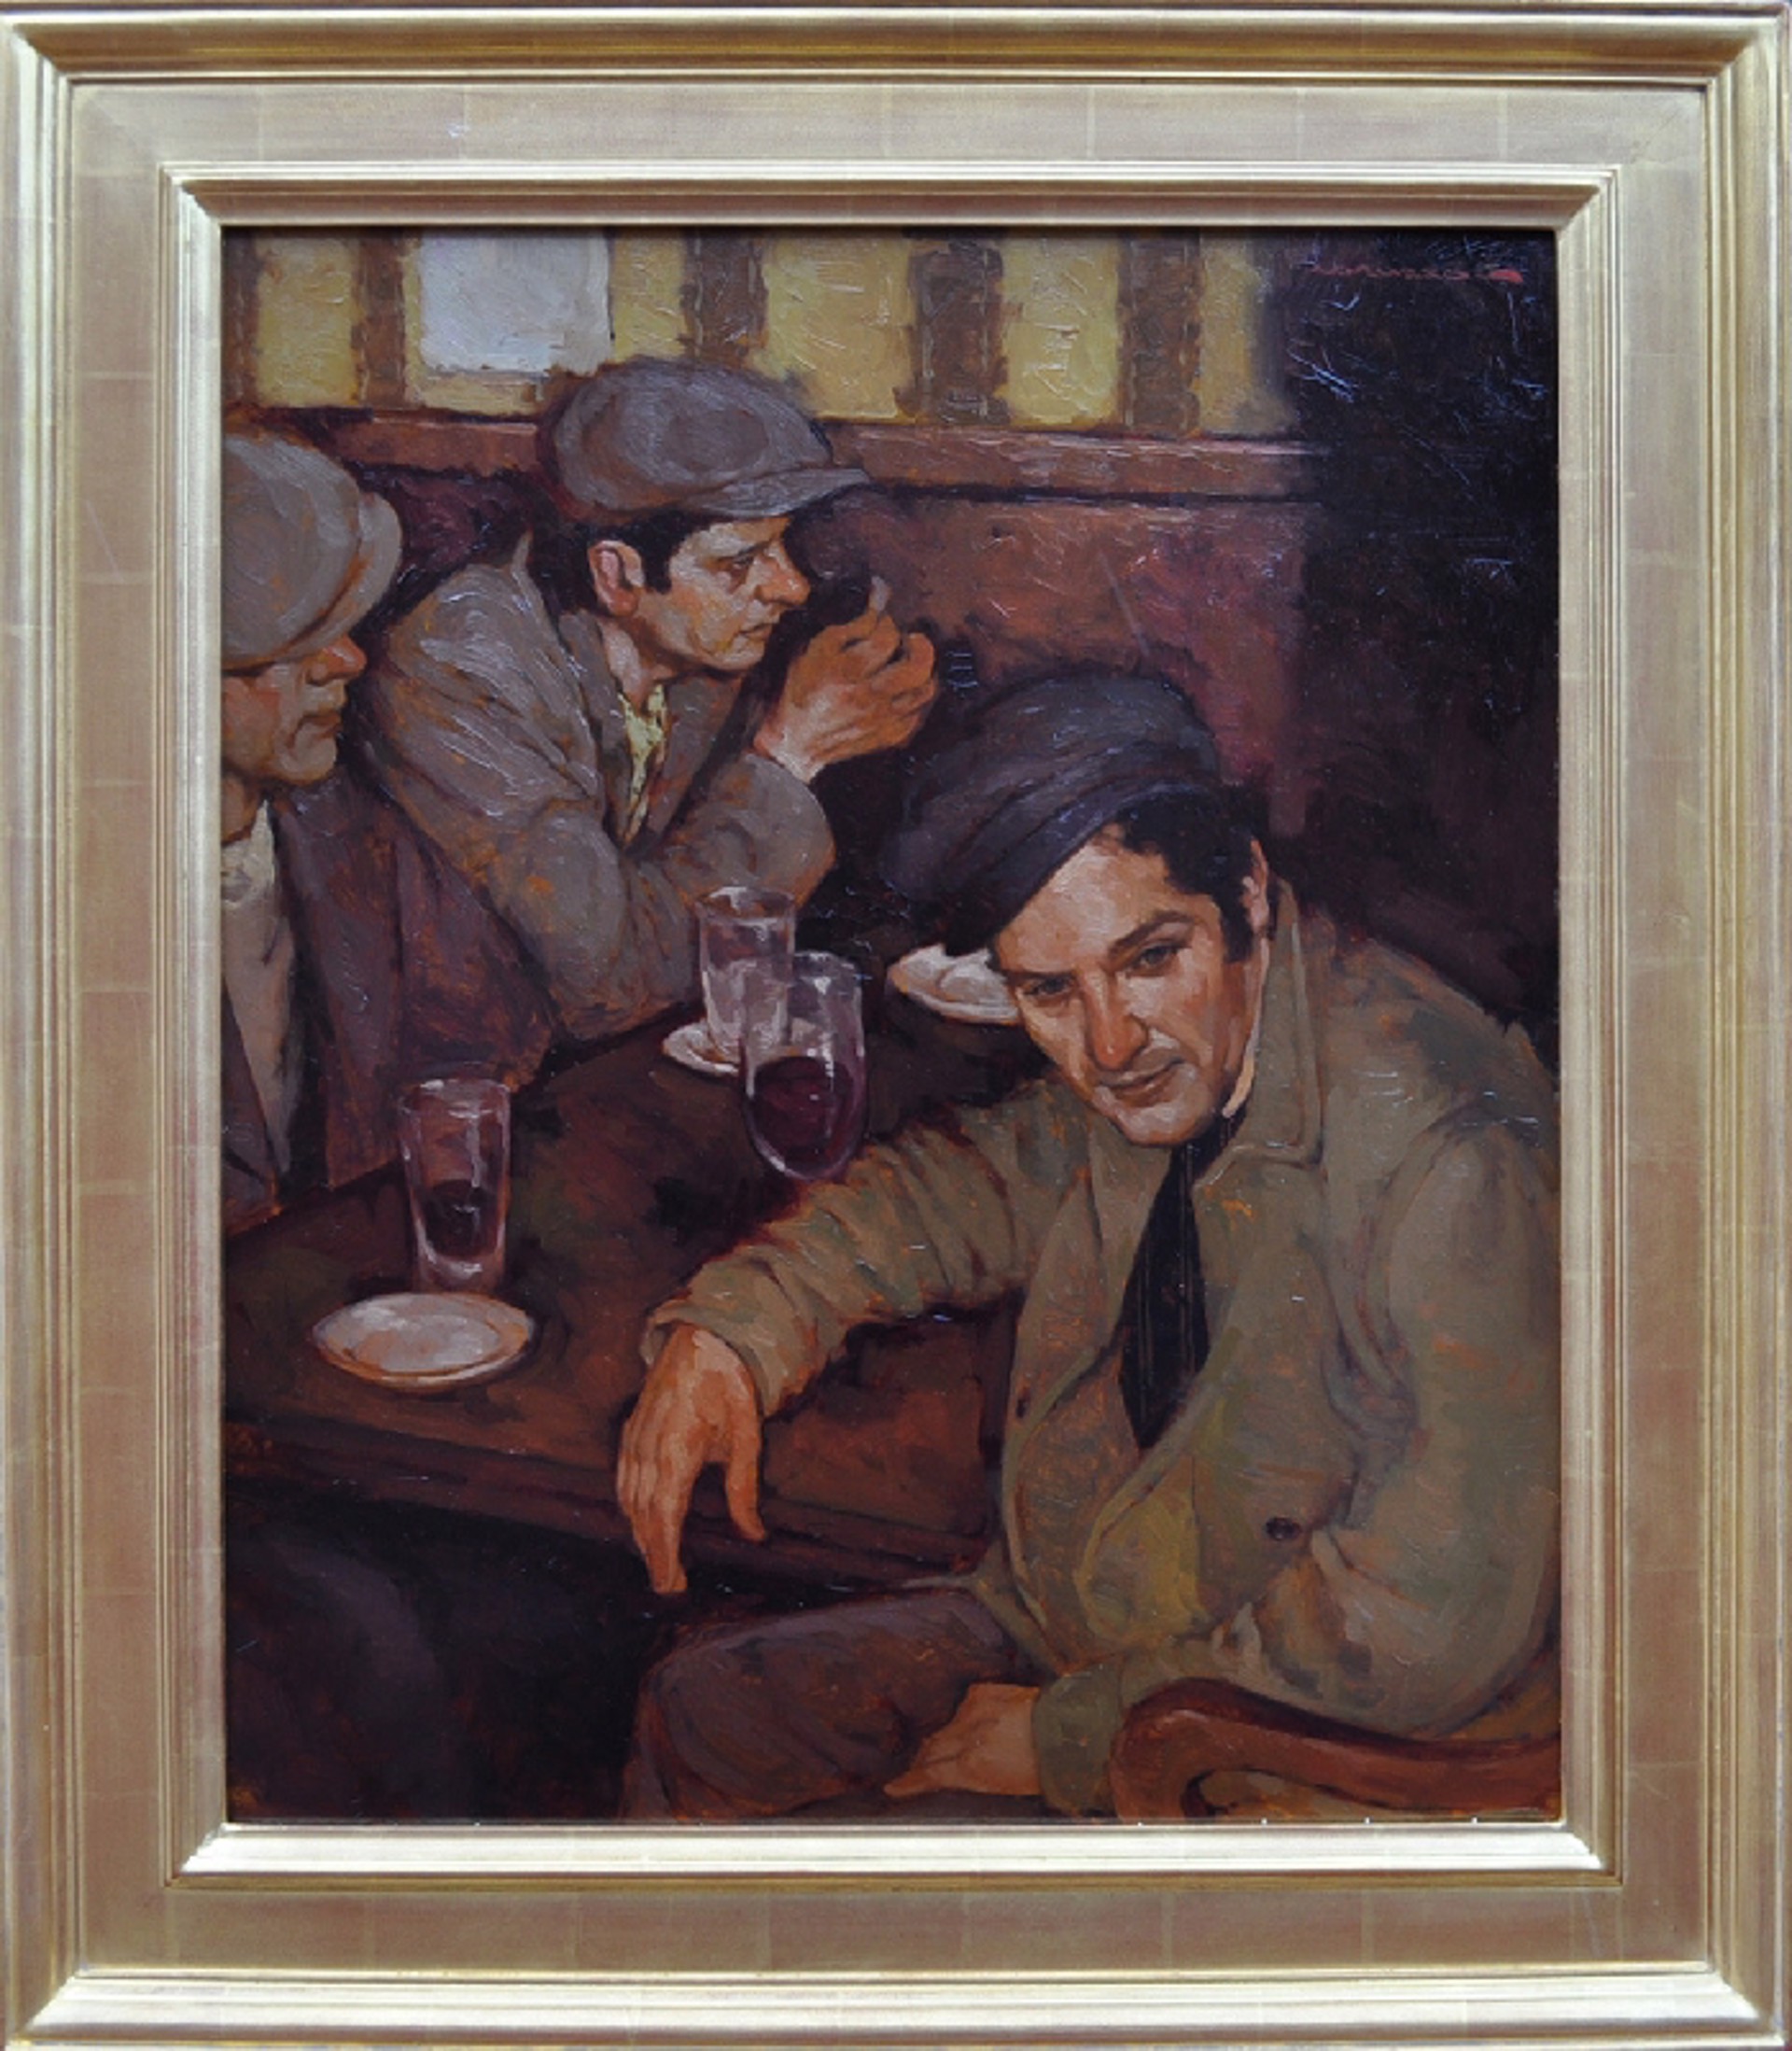 Joseph Lorusso, After the Shift by Secondary Offerings